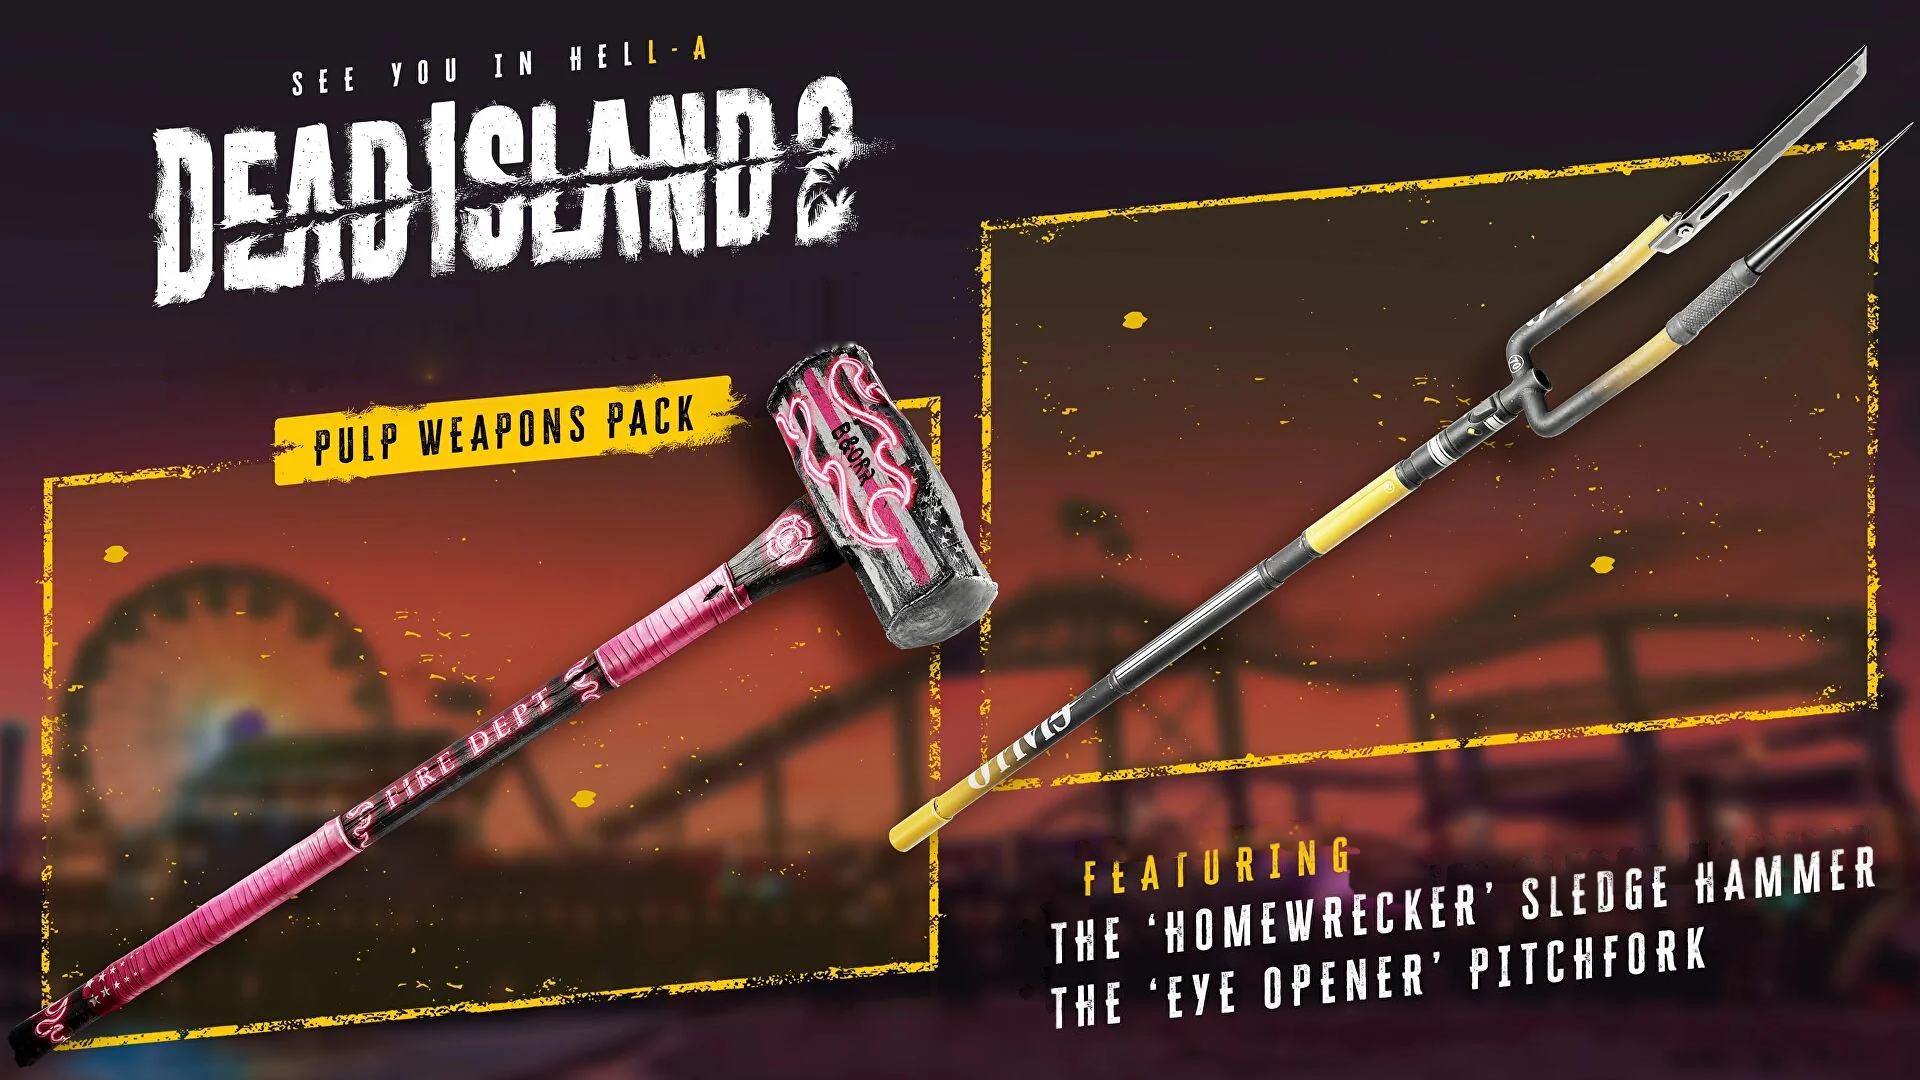 Dead Island 2 - Pulp Weapons Pack DLC US PS4 CD Key 13.55 $